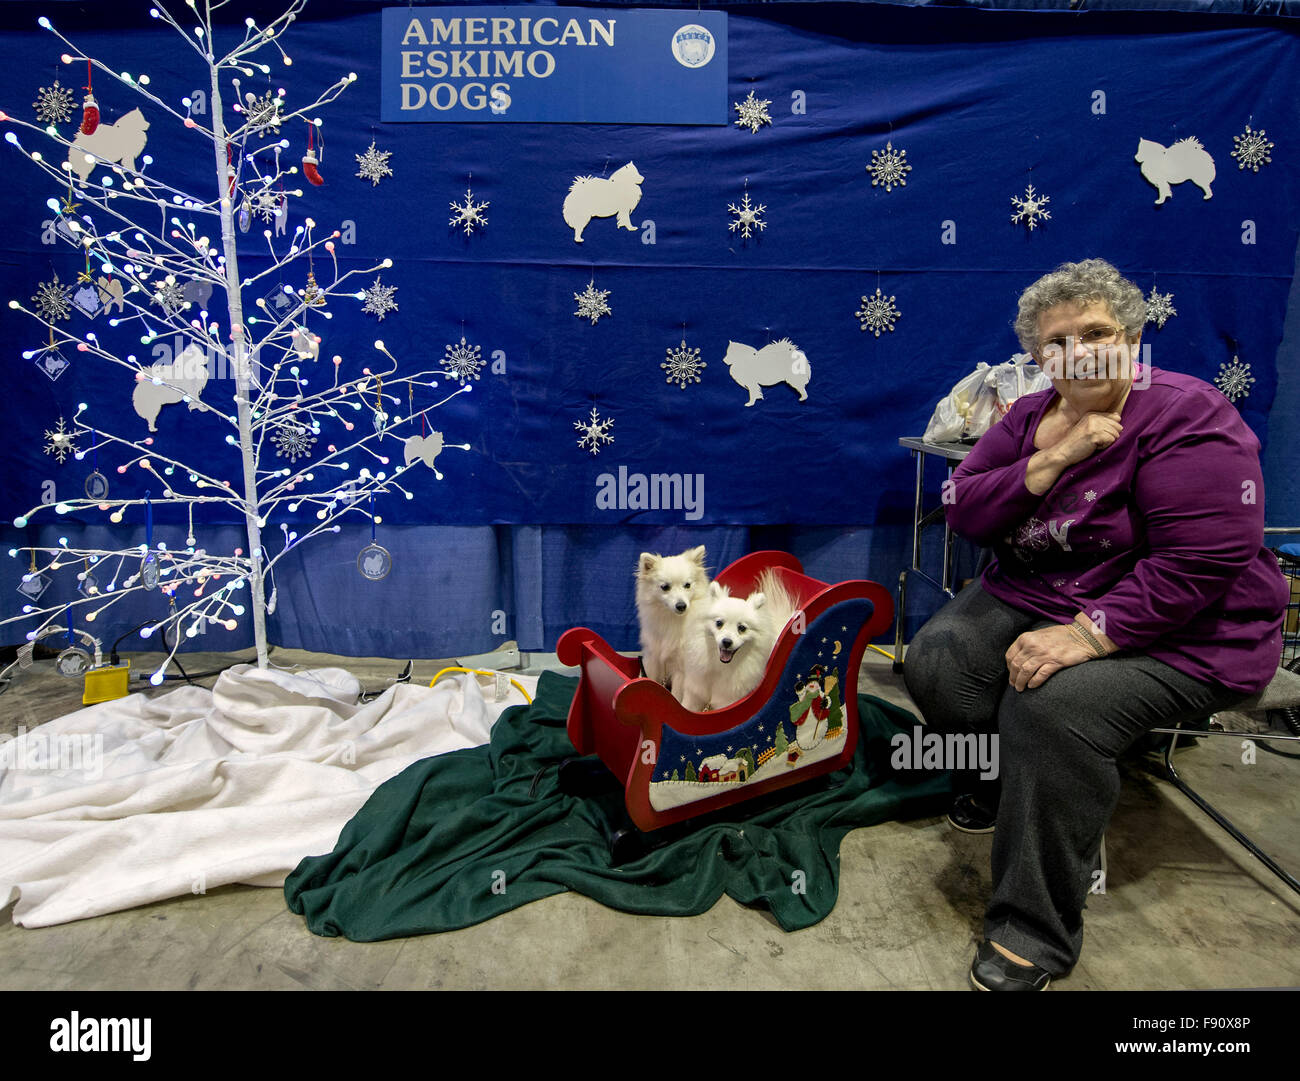 Orlando, Florida, USA. 12th Dec, 2015. The American Eskimo display at ''Meet The Breeds'' during the 2015 AKC/Eukenuba Championships. With over 6,100 entries, this is the largest dog show held in the United States in the last 20 years. © Brian Cahn/ZUMA Wire/Alamy Live News Stock Photo